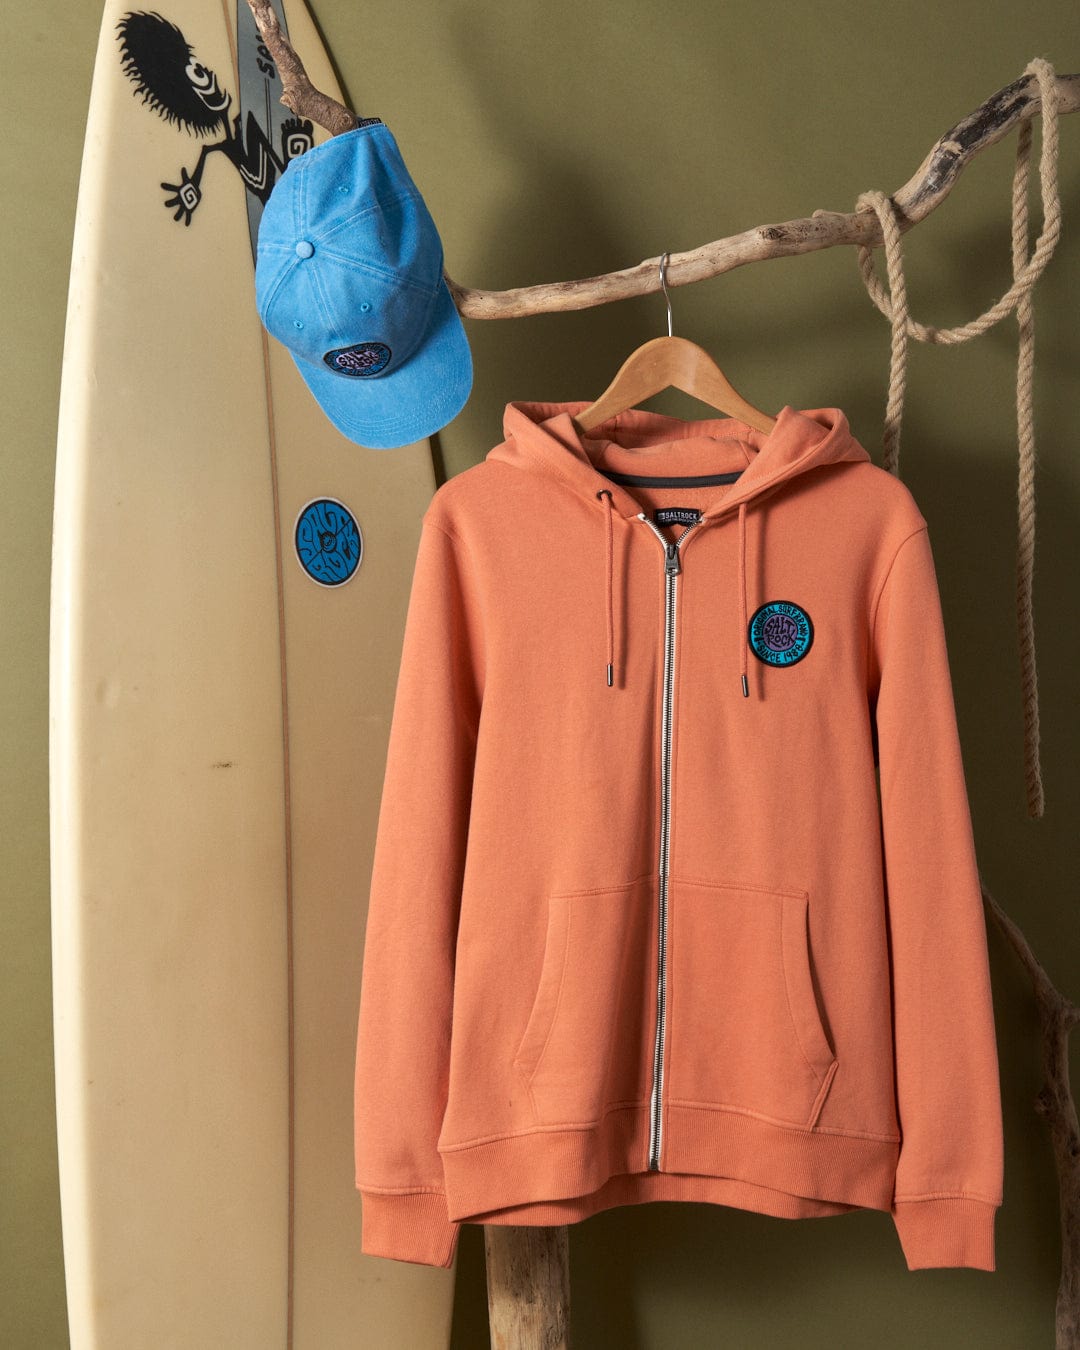 Saltrock orange hoodie with branded metal eyelets and blue cap hanging on a branch next to a Saltrock retro surfboard against a green wall.